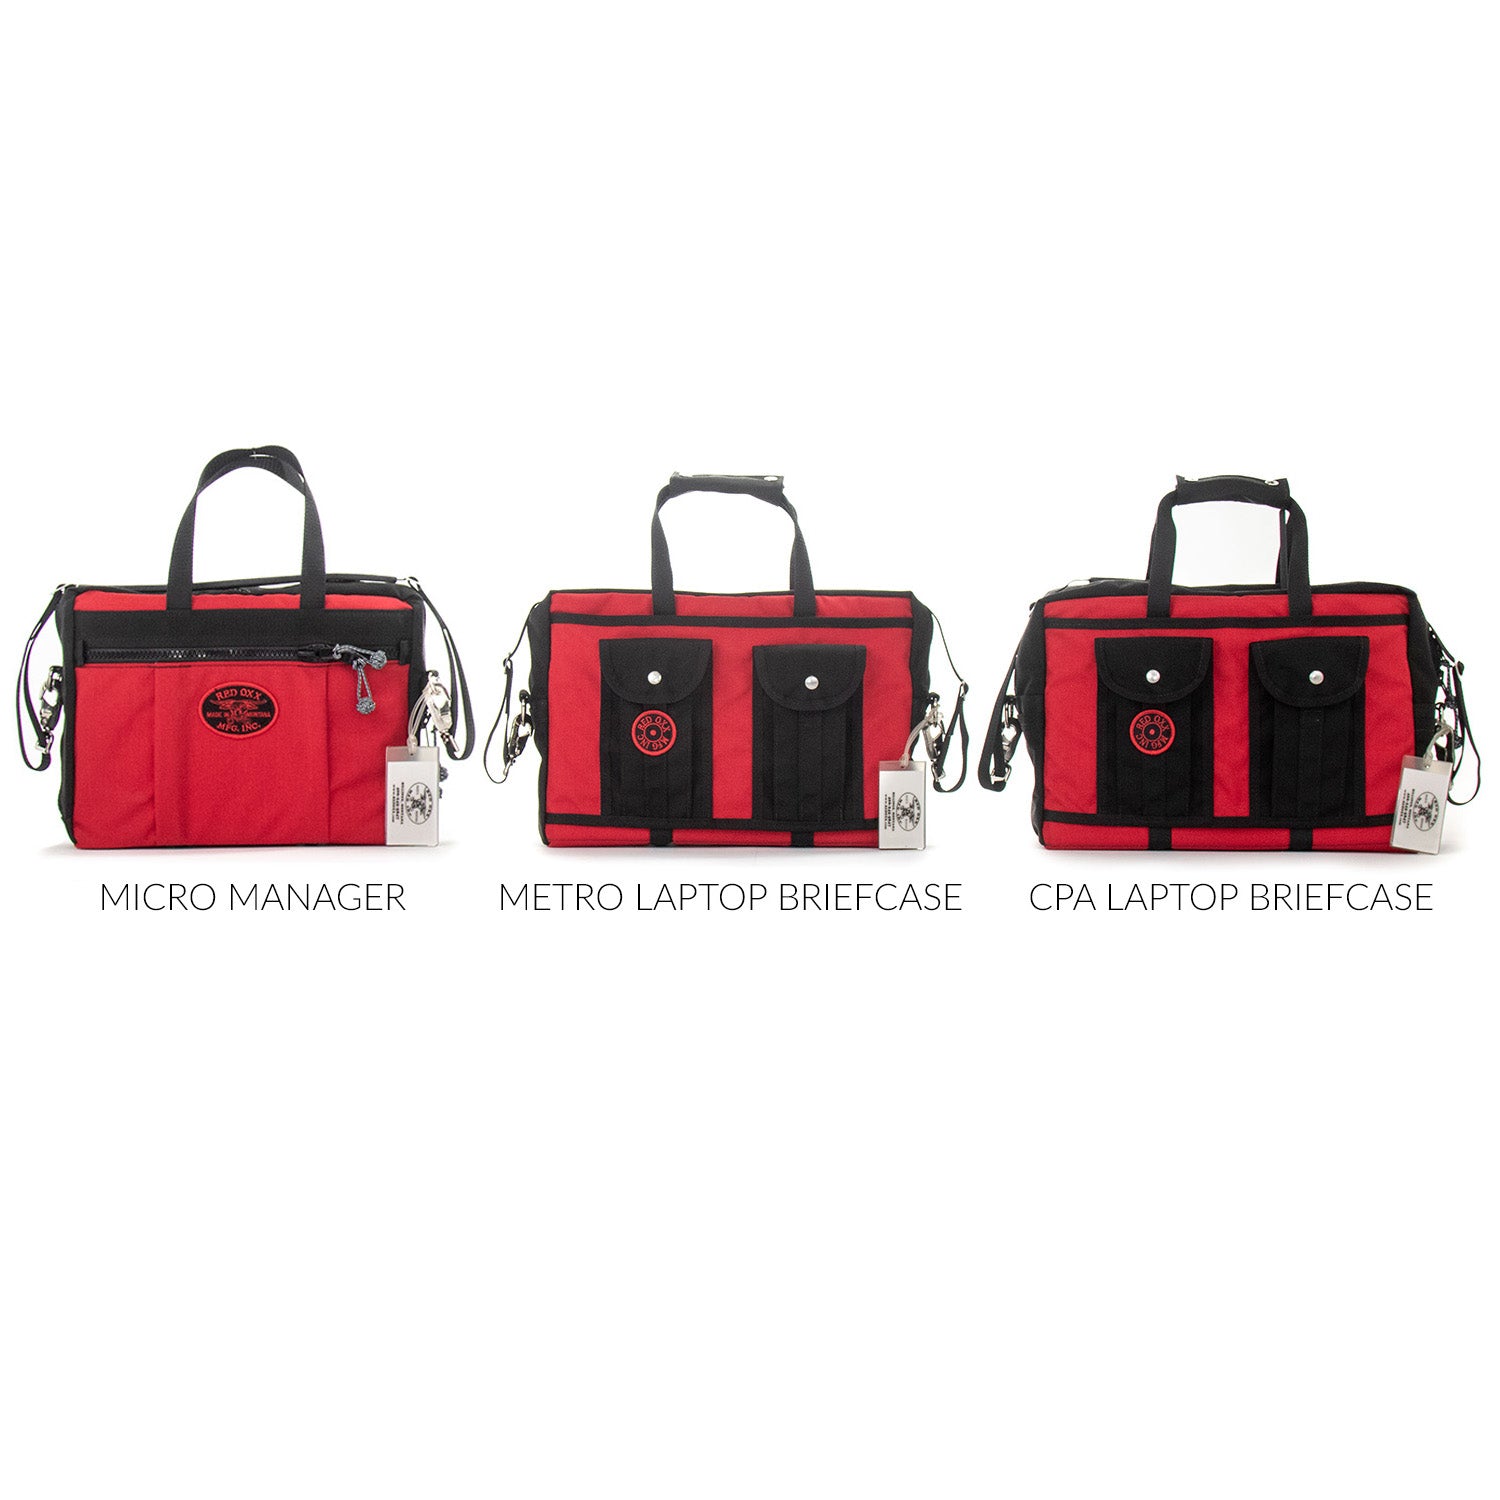 Size comparison from left to right. Micro Manageer, Metro Laptop Case, CPA Laptop Briefcase.